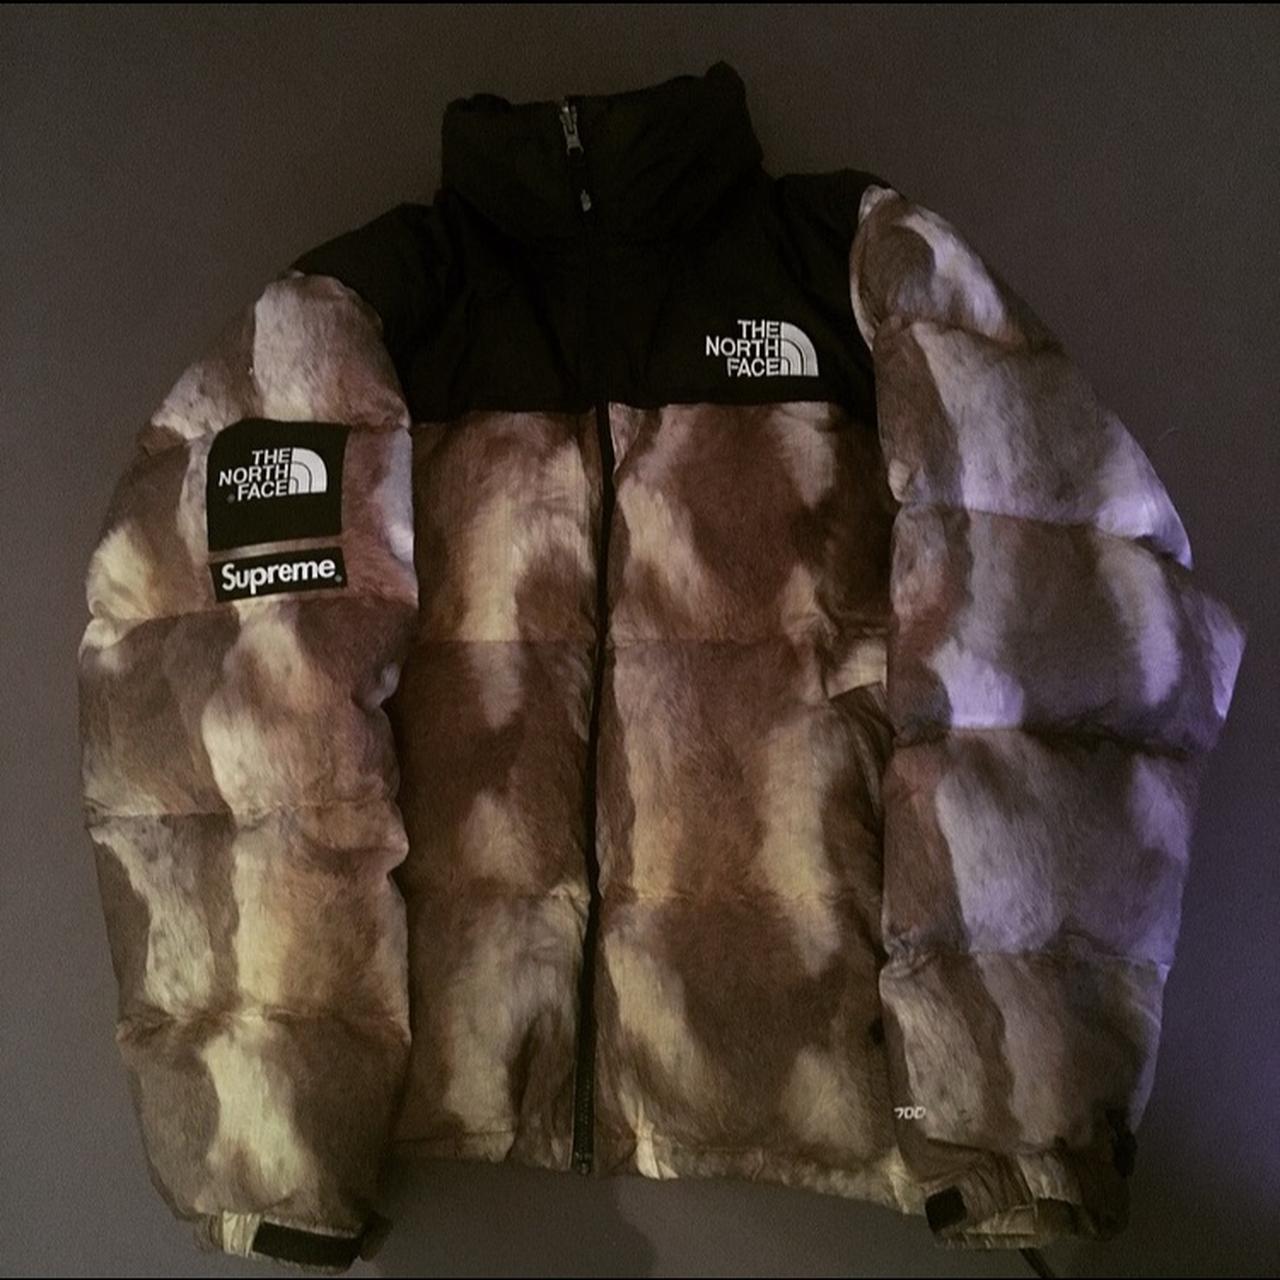 WTS for good price, Supreme x The North Face faux fur...